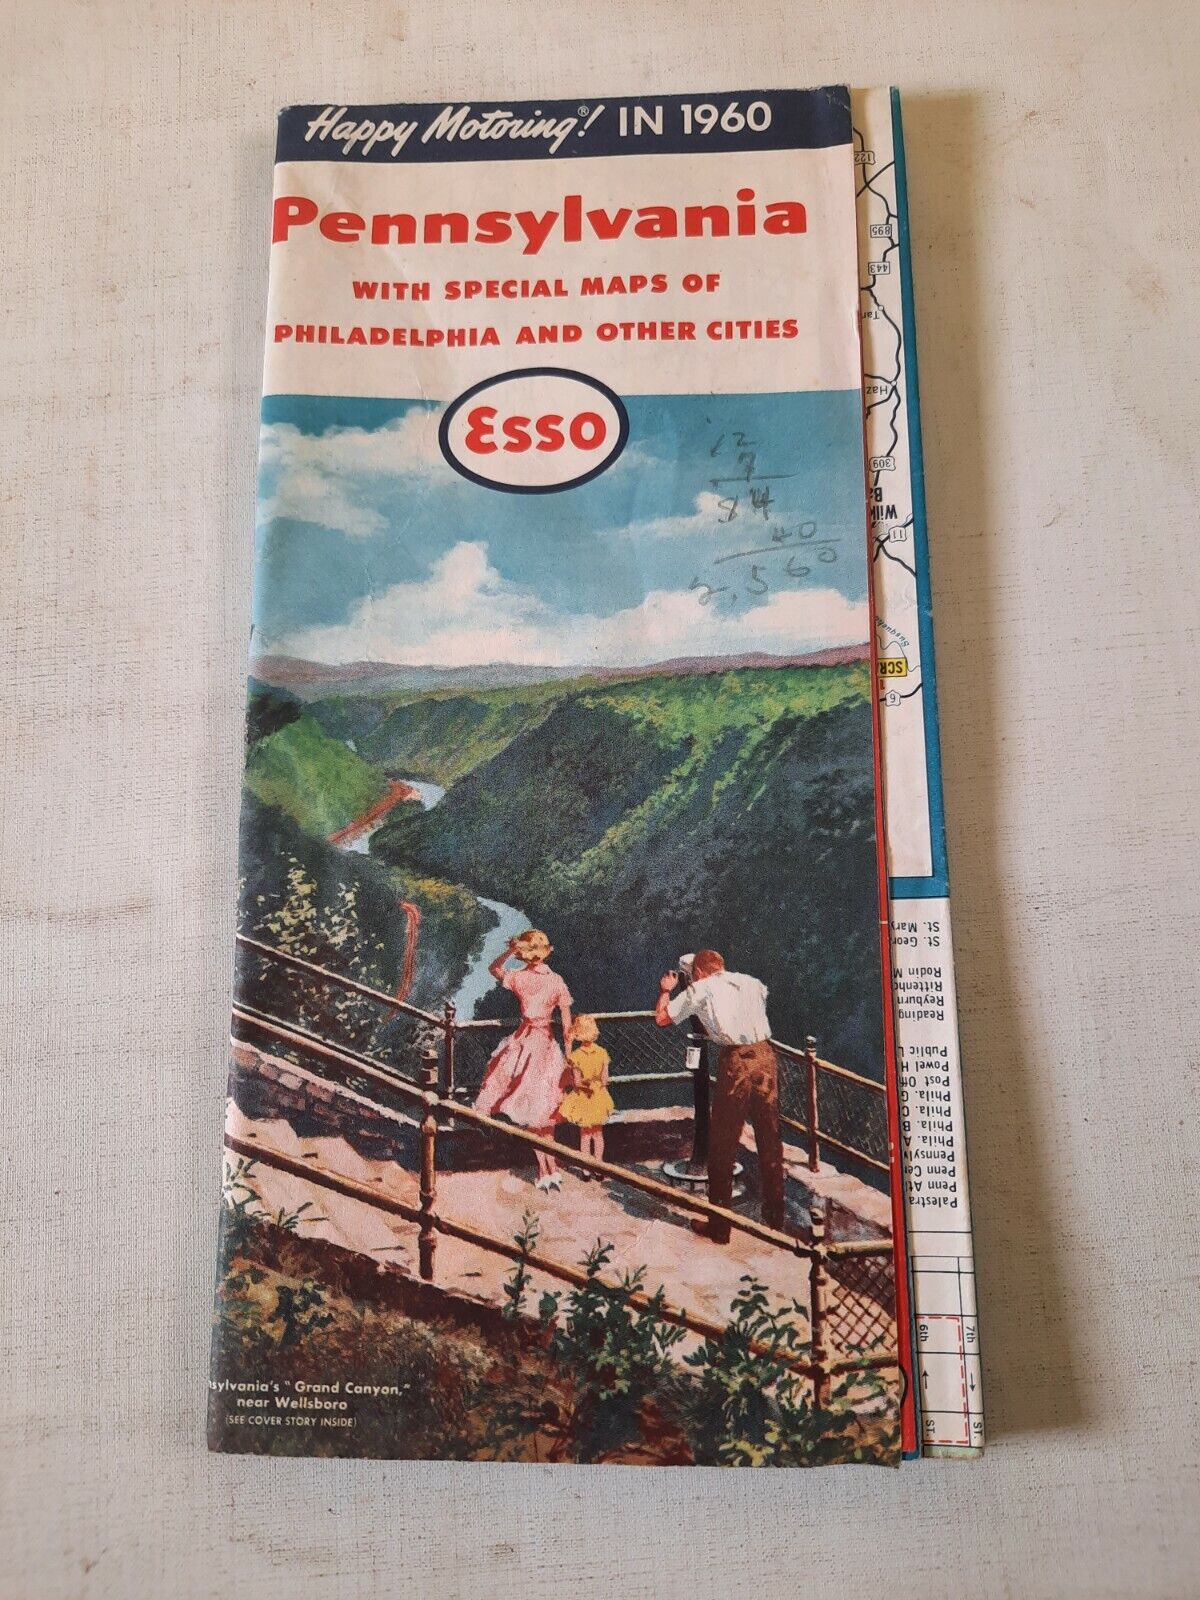 Vtg 1960 Esso Pennsylvania road map special maps of Philadelphia & other cities 